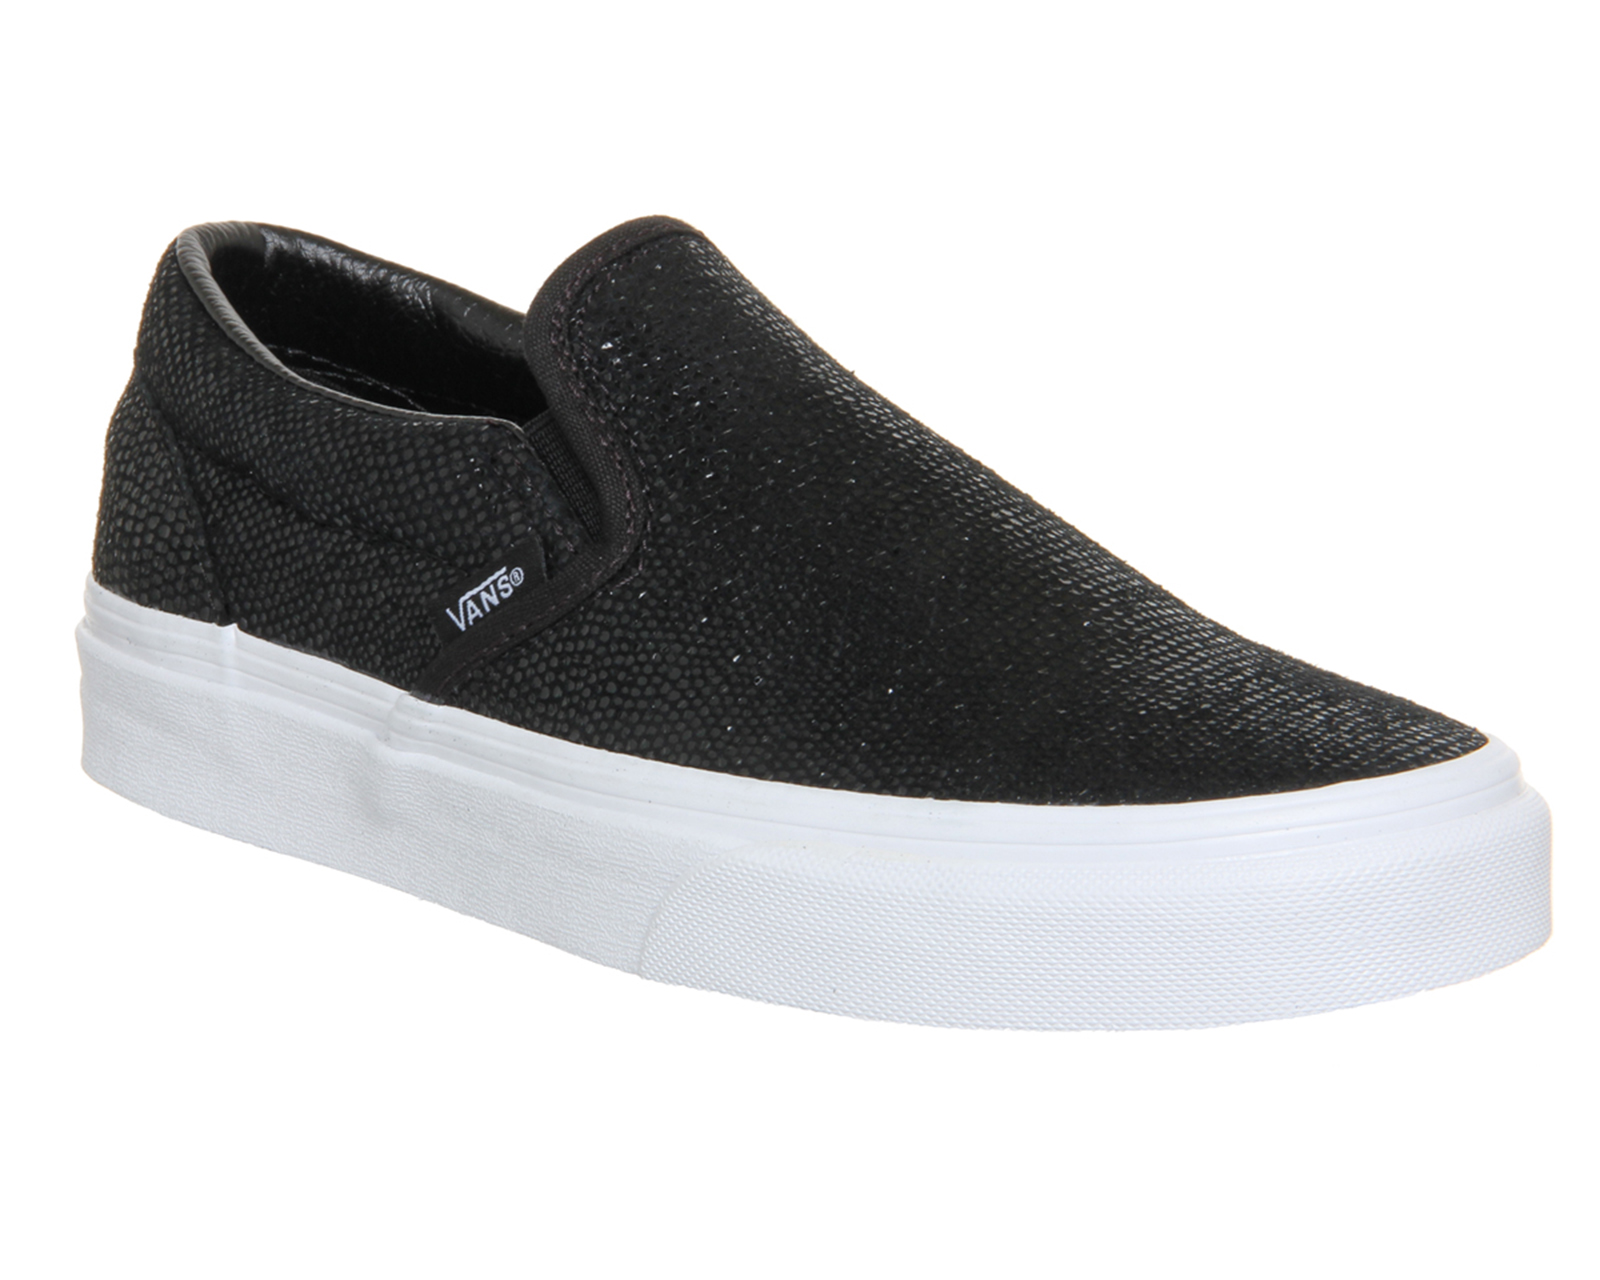 Black Slip On Vans With White Sole on Sale, SAVE 33% - colaisteanatha.ie